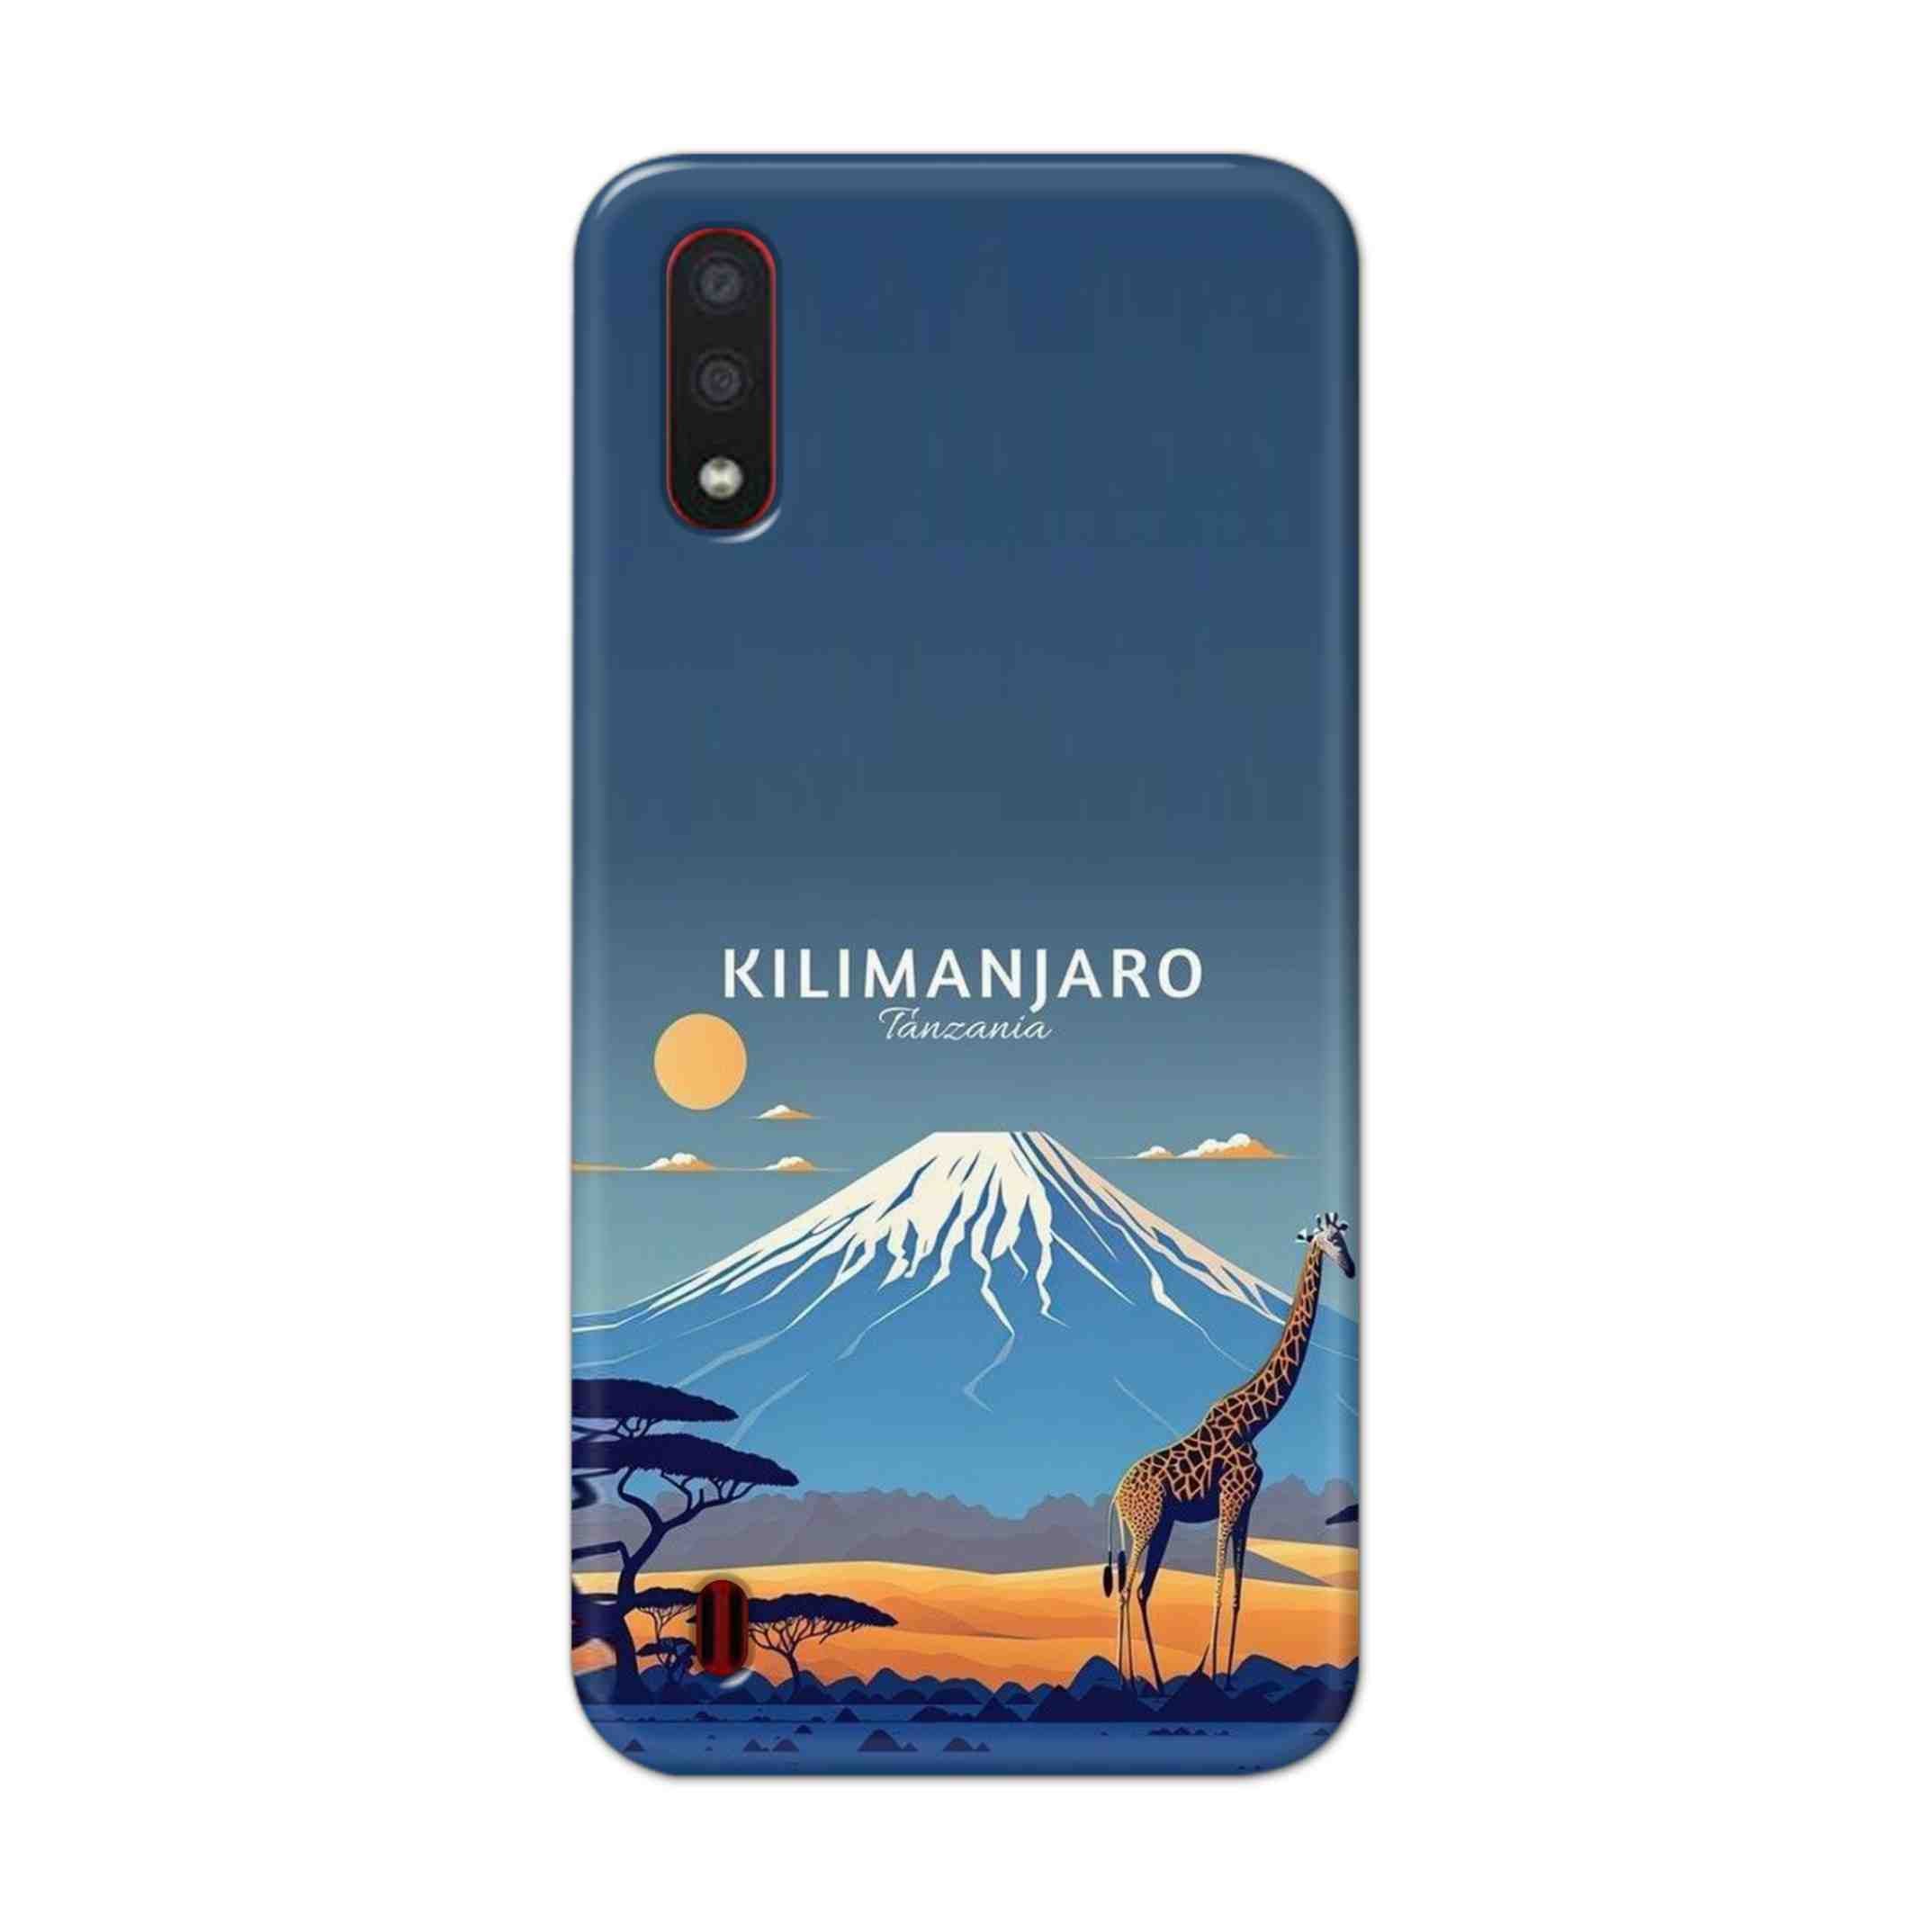 Buy Kilimanjaro Hard Back Mobile Phone Case/Cover For Samsung Galaxy M01 Online